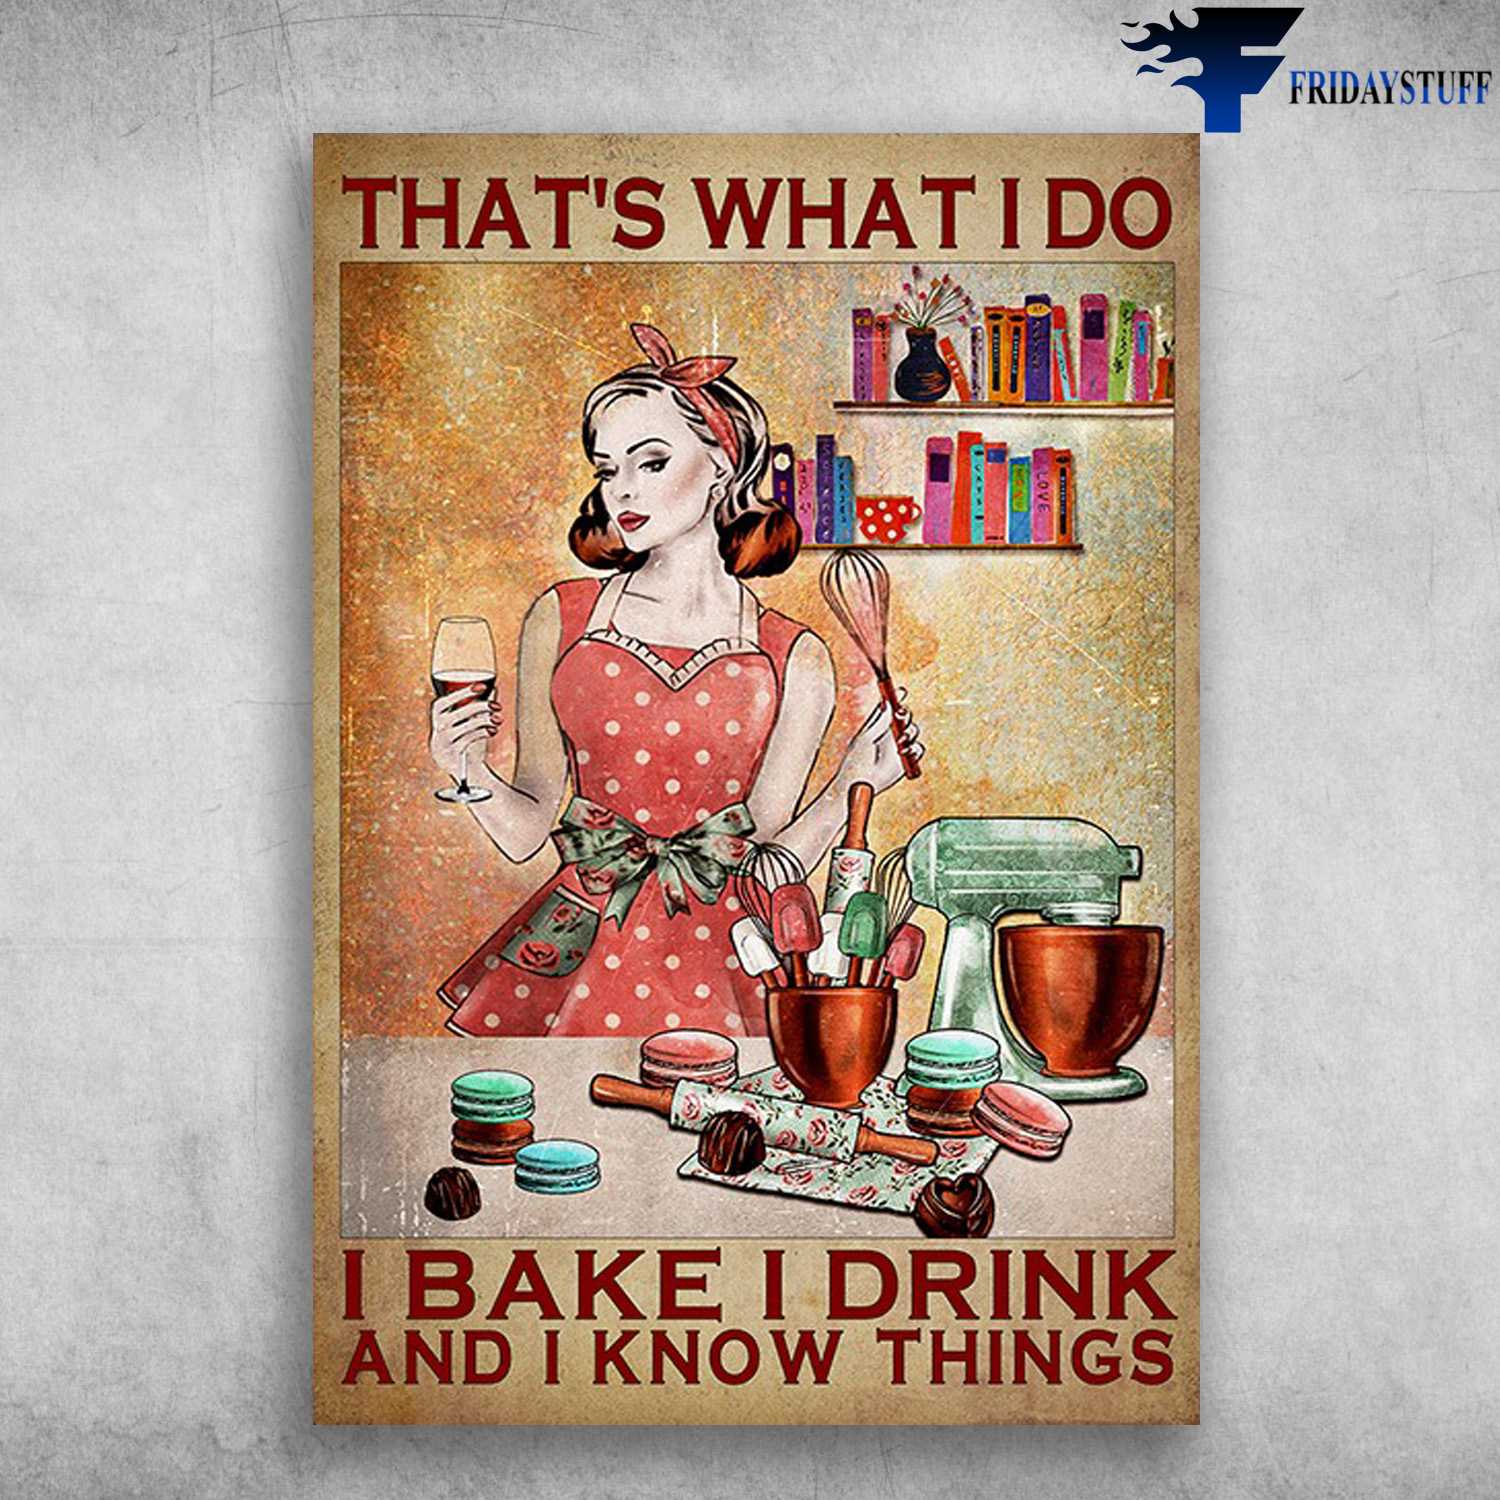 Baking Girl, Wine And Cake - That's What I Do, I Bake I Drink, And I Know Things